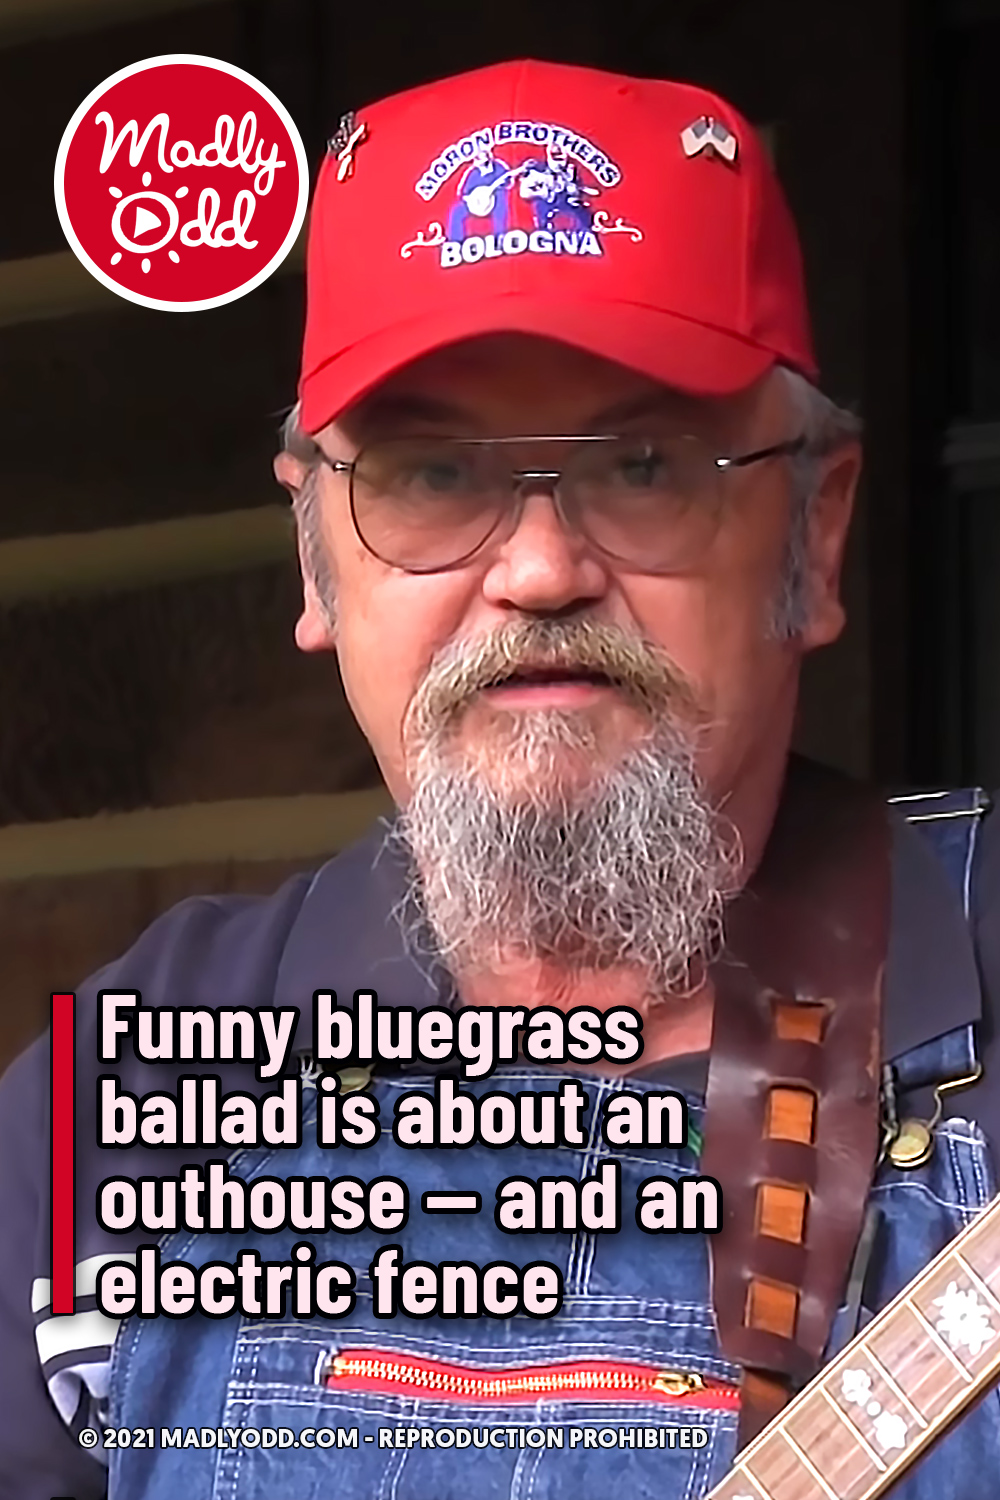 Funny bluegrass ballad is about an outhouse — and an electric fence